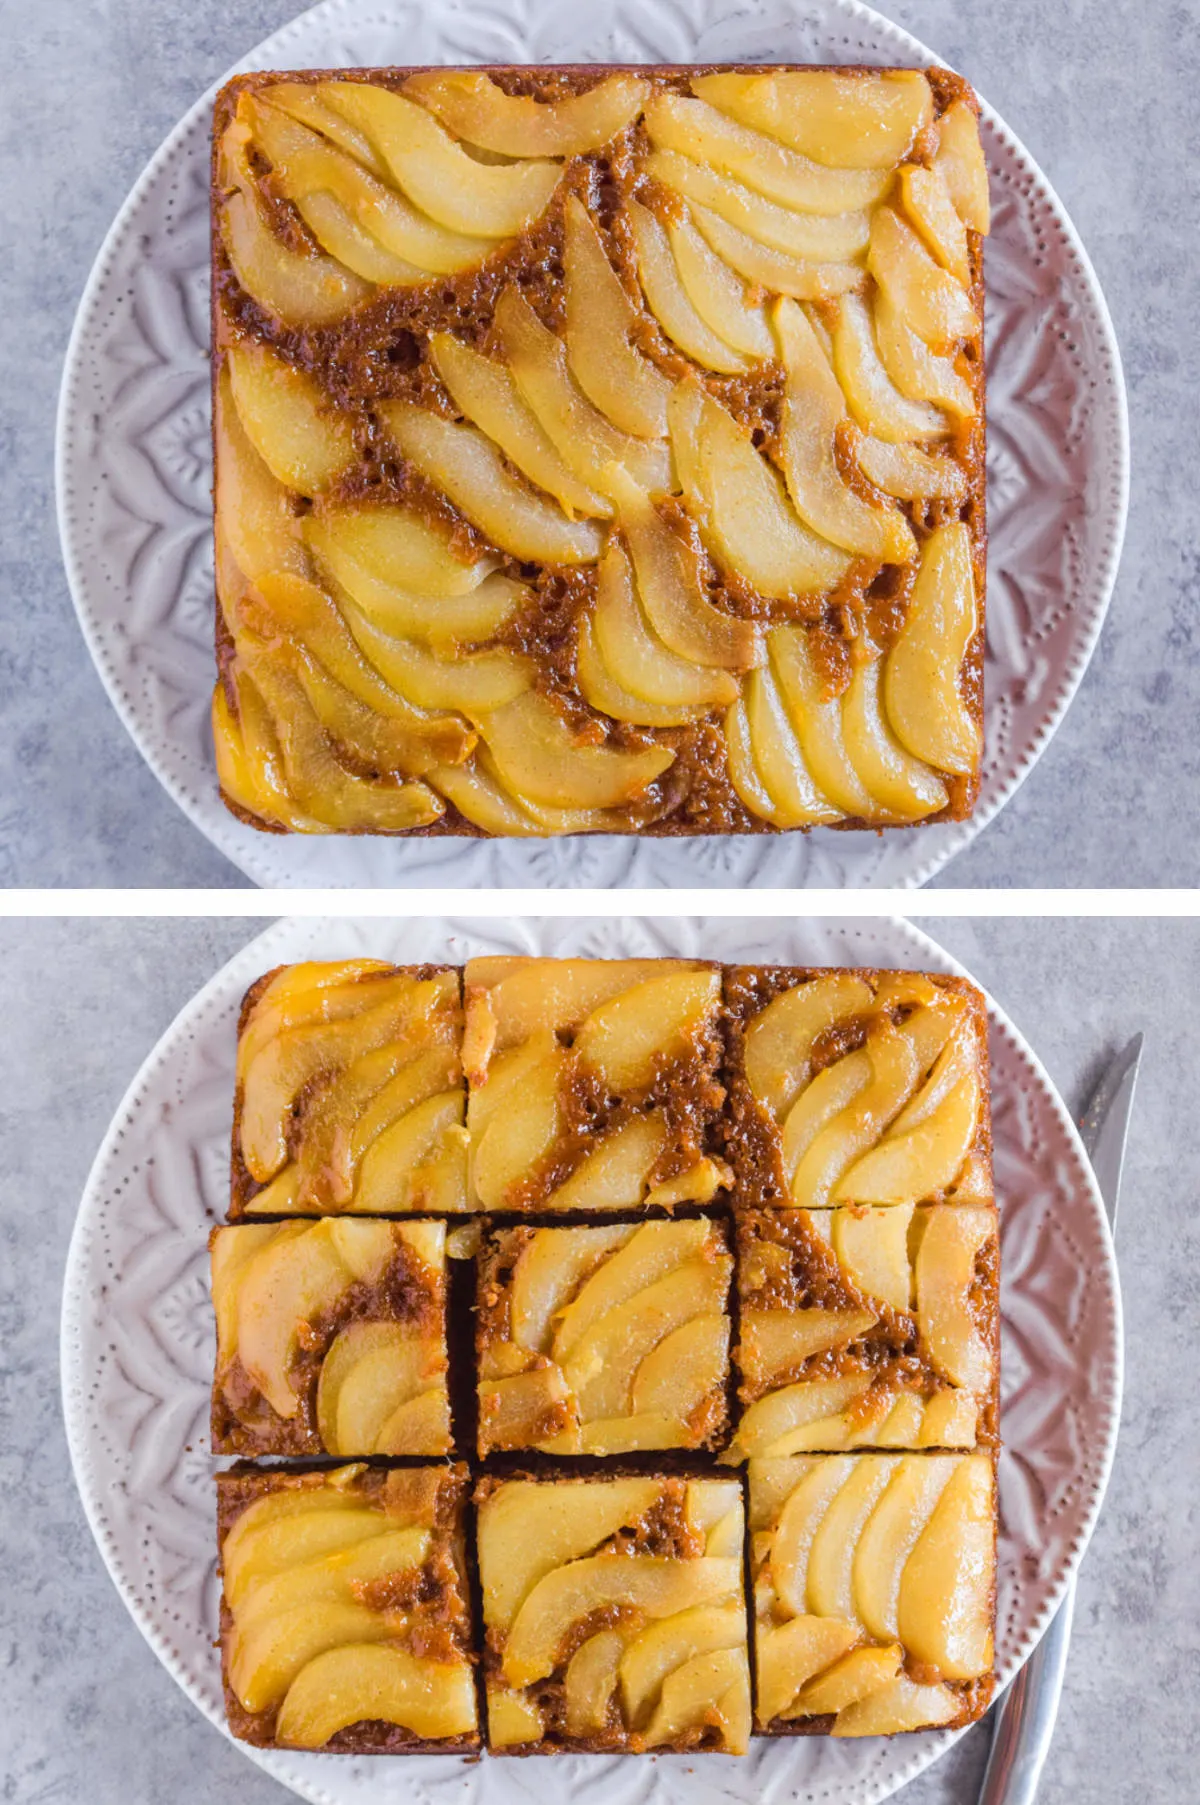 Two overhead images in one: 1. Cake is flipped upside-down and placed on a plate. 2. Cake is sliced into squares. 